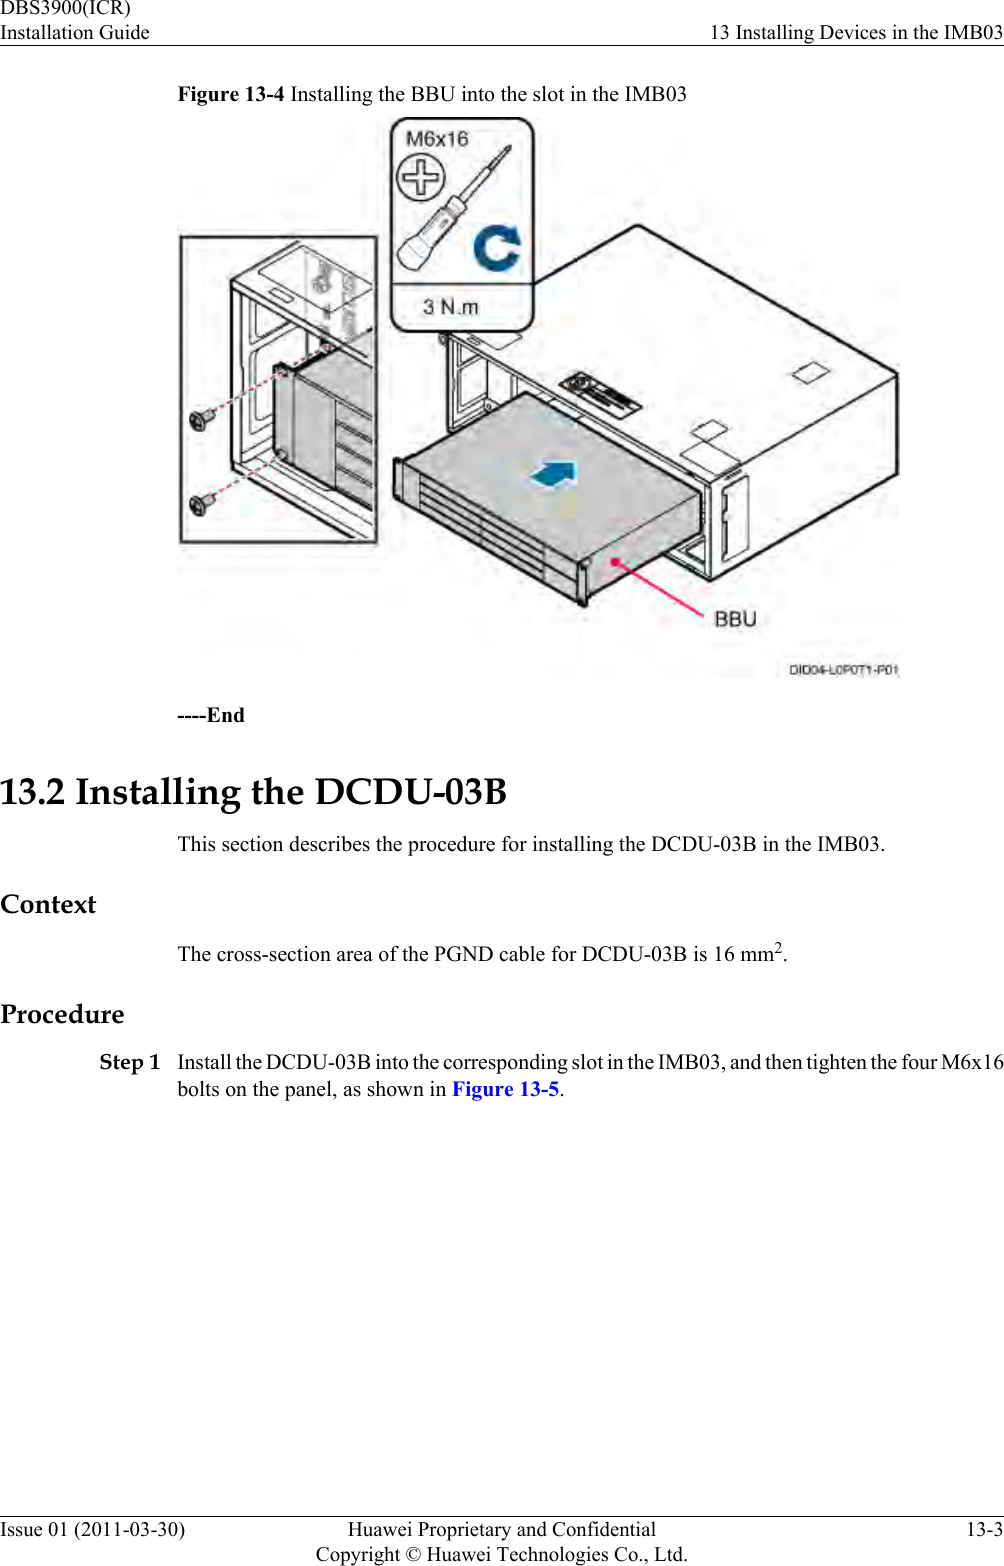 Figure 13-4 Installing the BBU into the slot in the IMB03----End13.2 Installing the DCDU-03BThis section describes the procedure for installing the DCDU-03B in the IMB03.ContextThe cross-section area of the PGND cable for DCDU-03B is 16 mm2.ProcedureStep 1 Install the DCDU-03B into the corresponding slot in the IMB03, and then tighten the four M6x16bolts on the panel, as shown in Figure 13-5.DBS3900(ICR)Installation Guide 13 Installing Devices in the IMB03Issue 01 (2011-03-30) Huawei Proprietary and ConfidentialCopyright © Huawei Technologies Co., Ltd.13-3